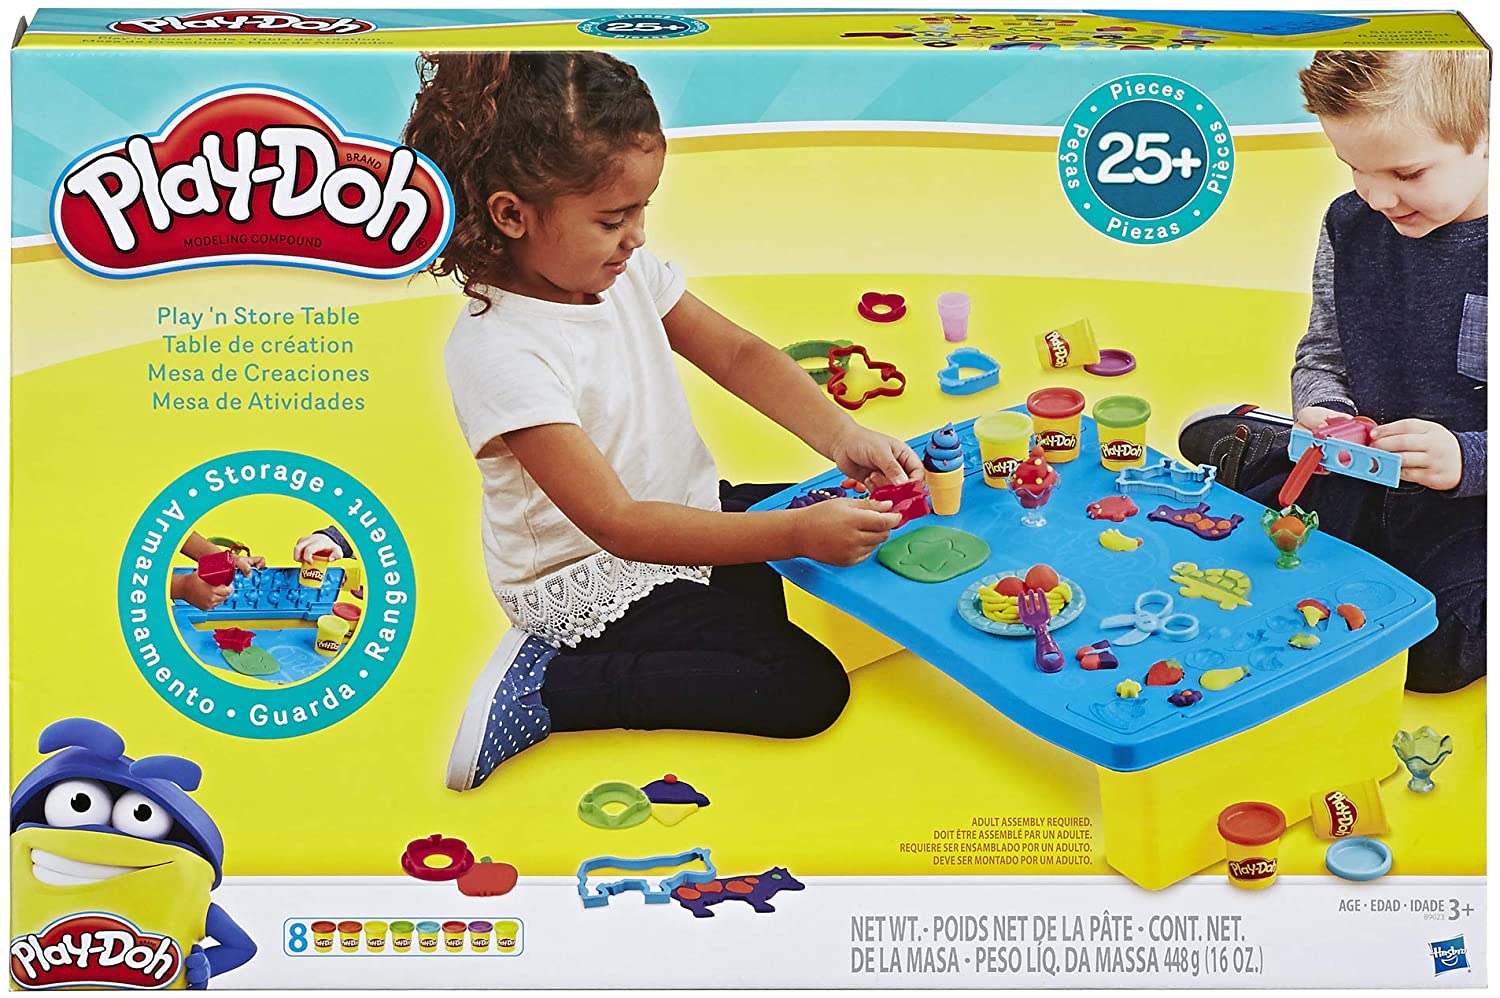 B9023 Play Doh Play 'n Store Table inc 6 Tubs of Dough & Accessories Sensory and educational Toys for kids, boys, girls Ages 3+, Yellow, Blue